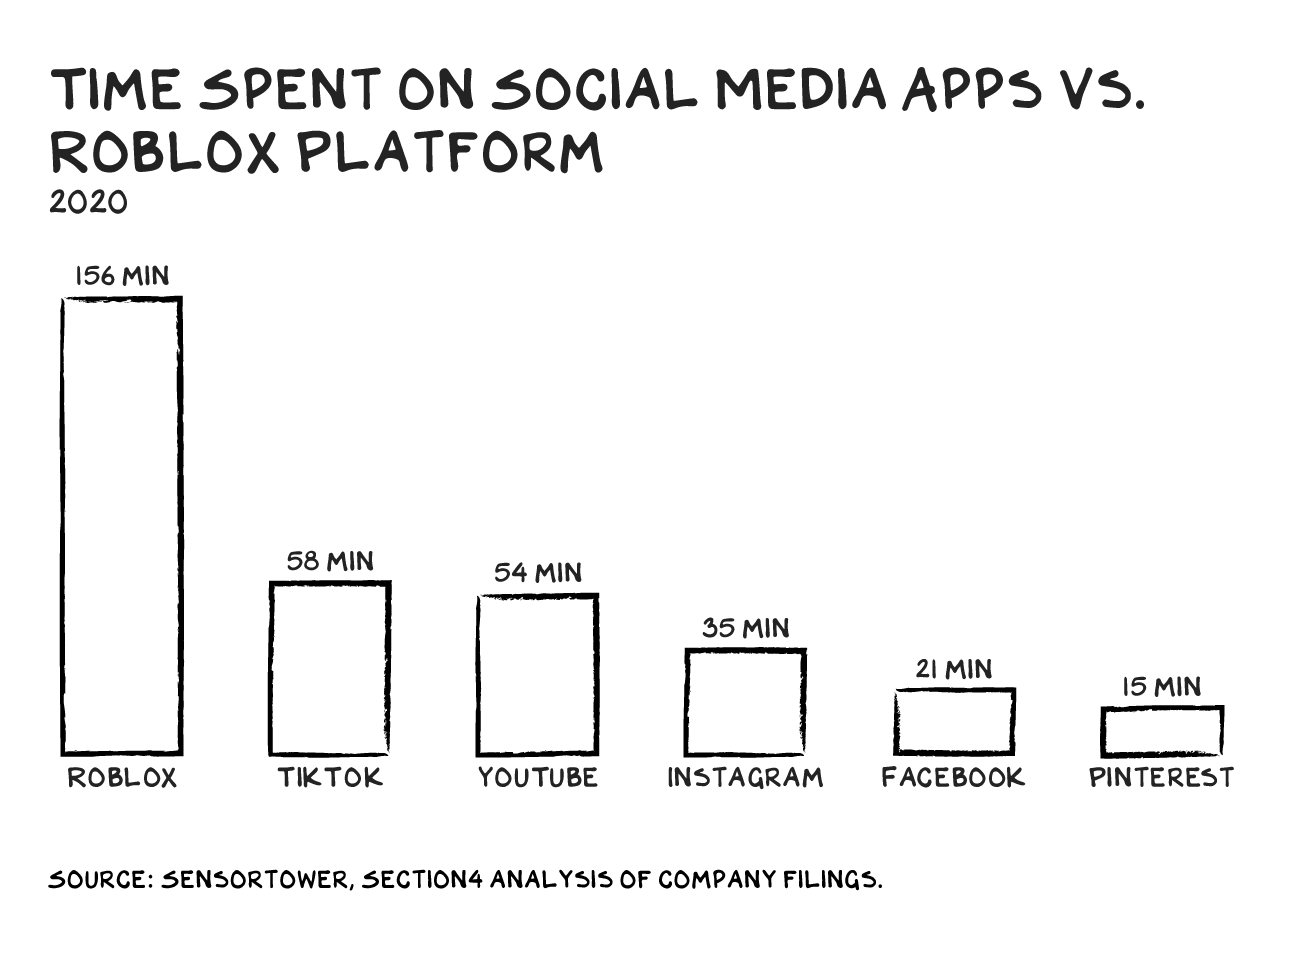 “Time Spent on Social Media Apps vs. Roblox Platform” chart— Roblox is at the highest with 156 Min. Source: Sensortower